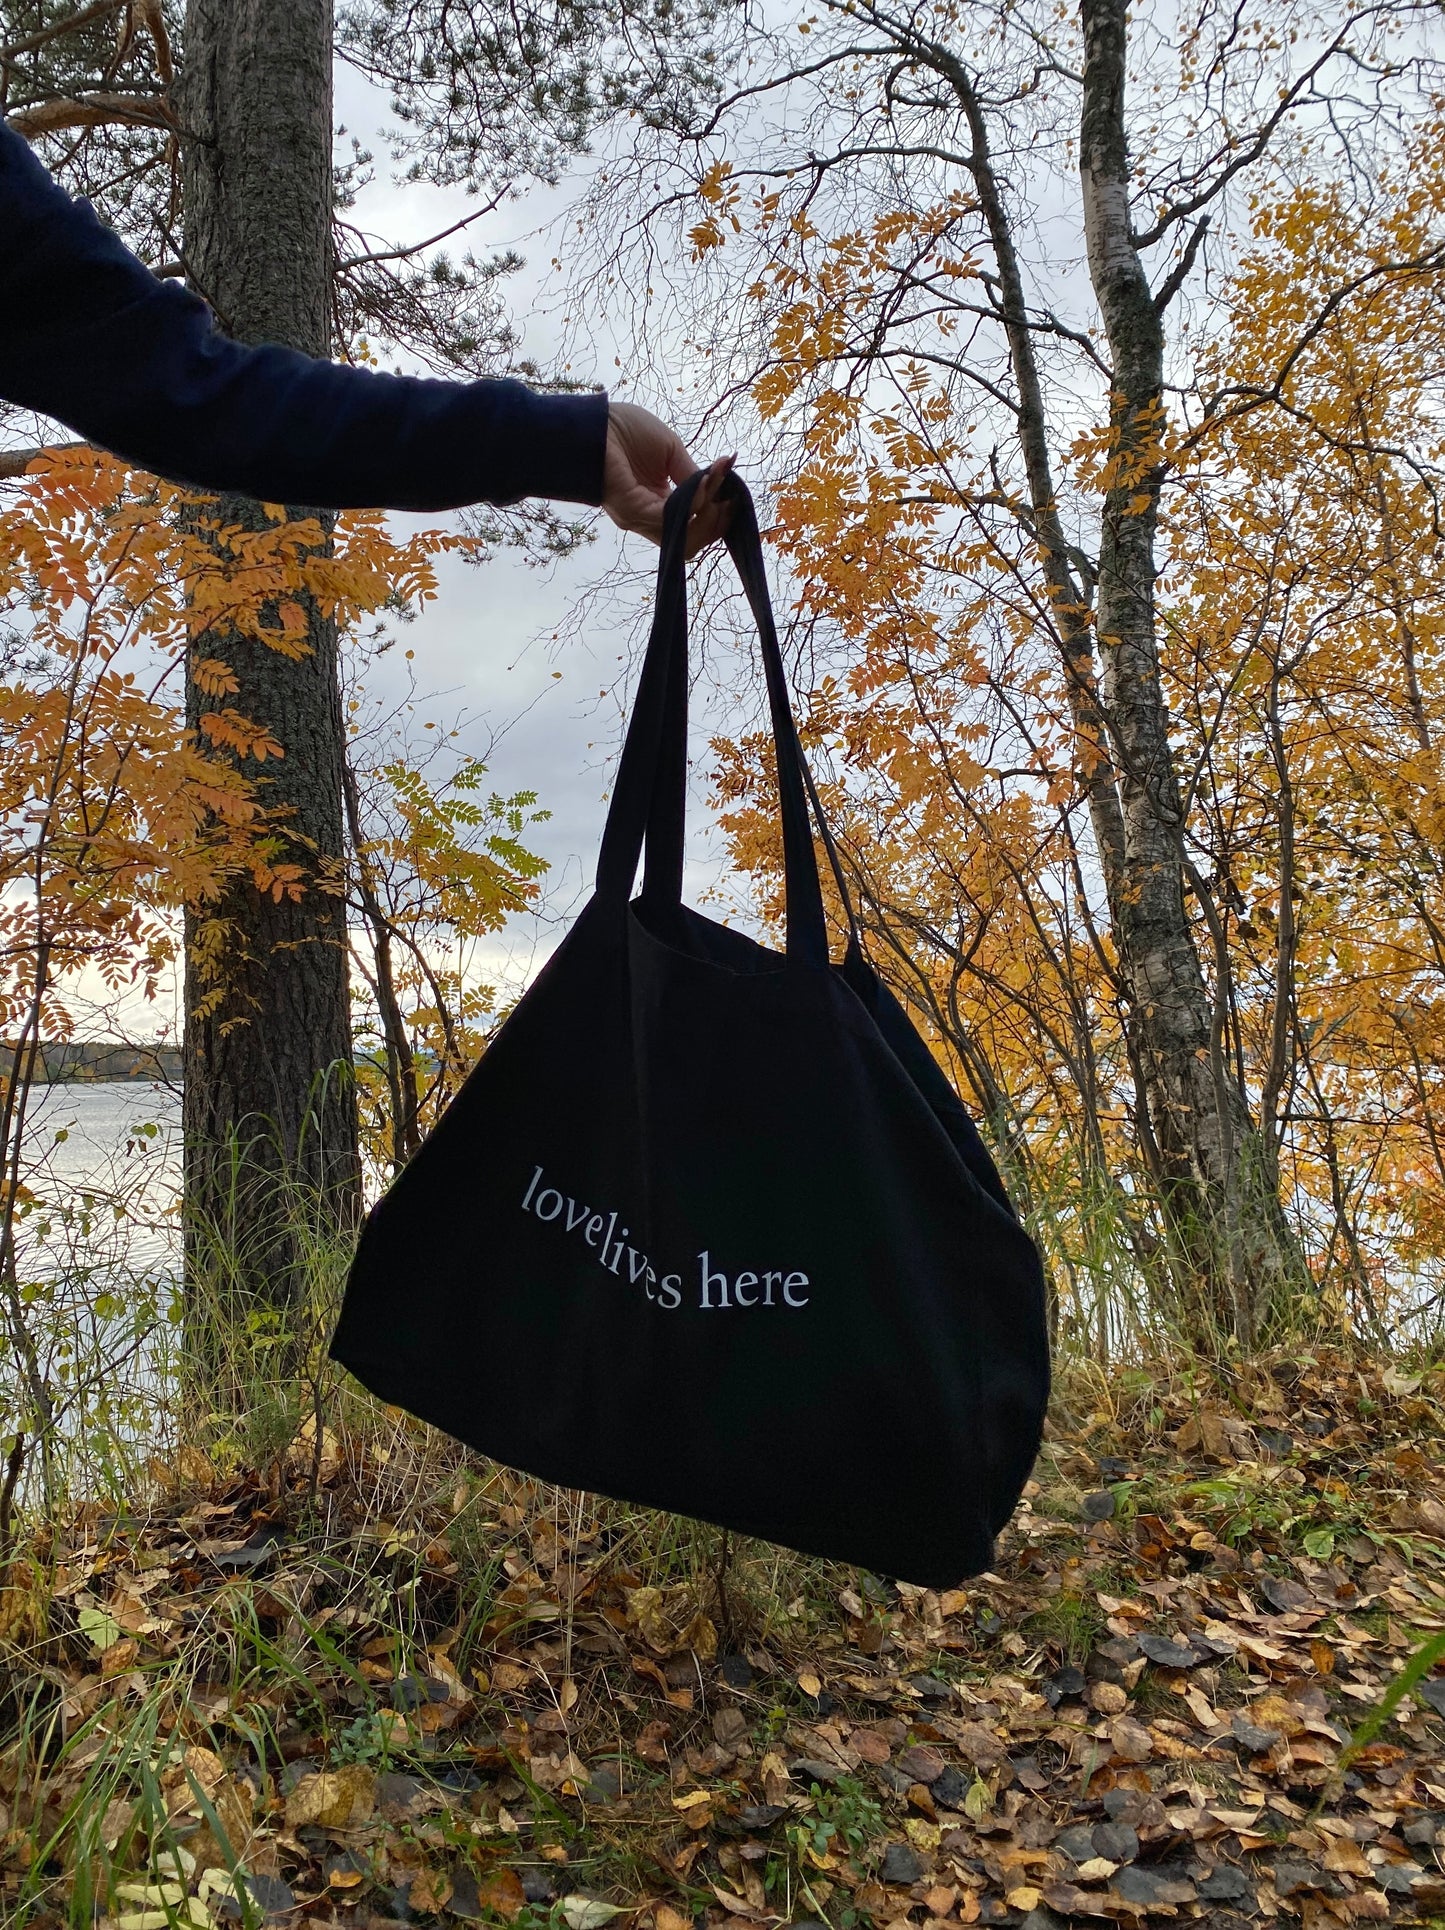 Love Lives Here - Sustainable Shopping Bag Black